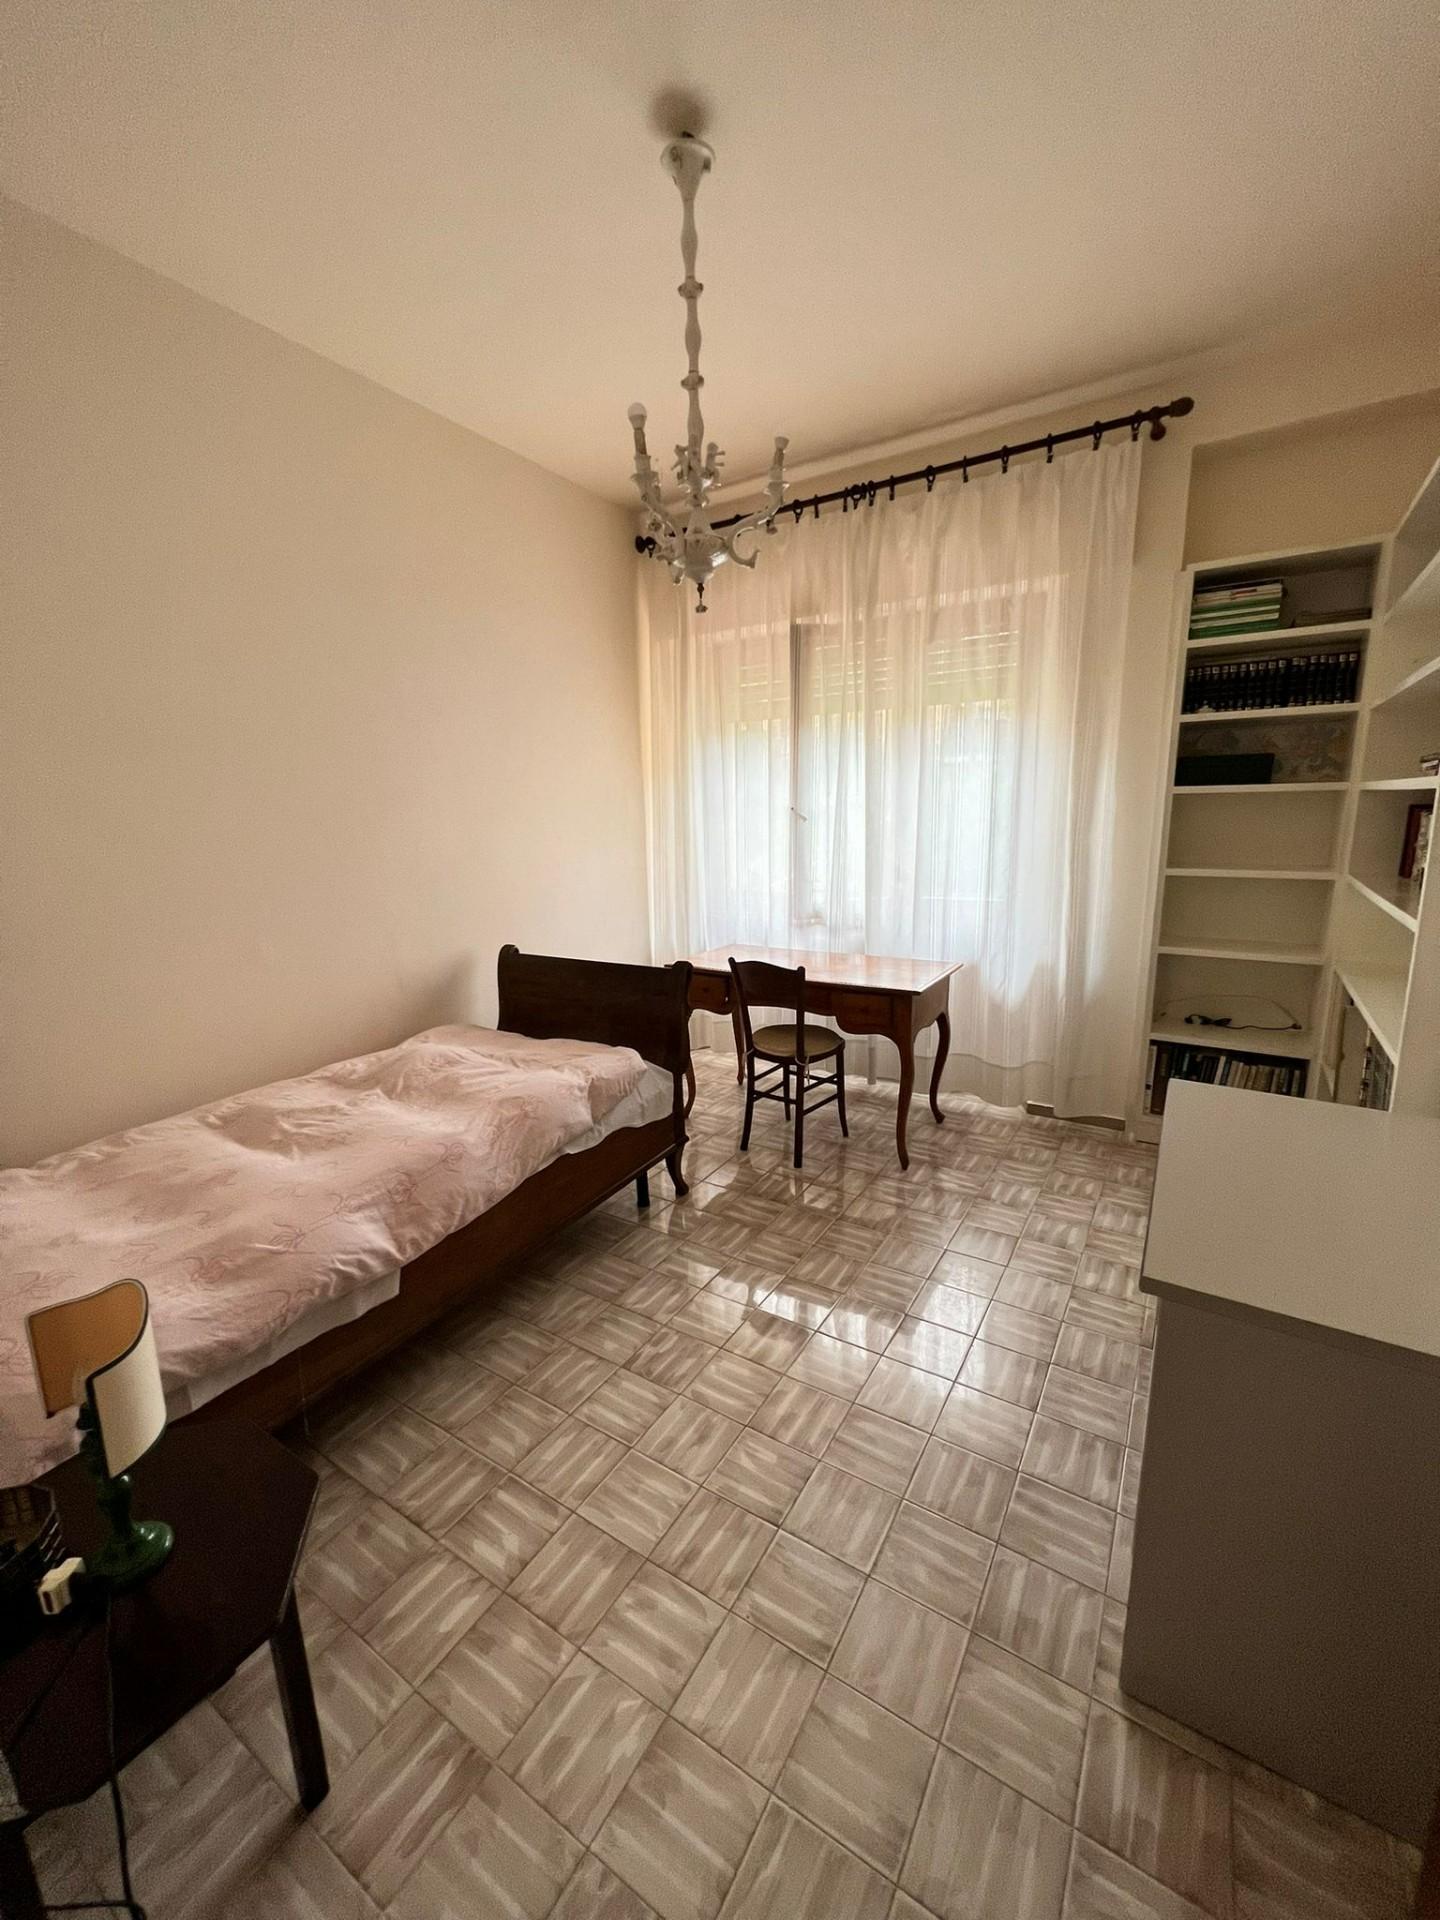 Room/Day bed for rent in Siena